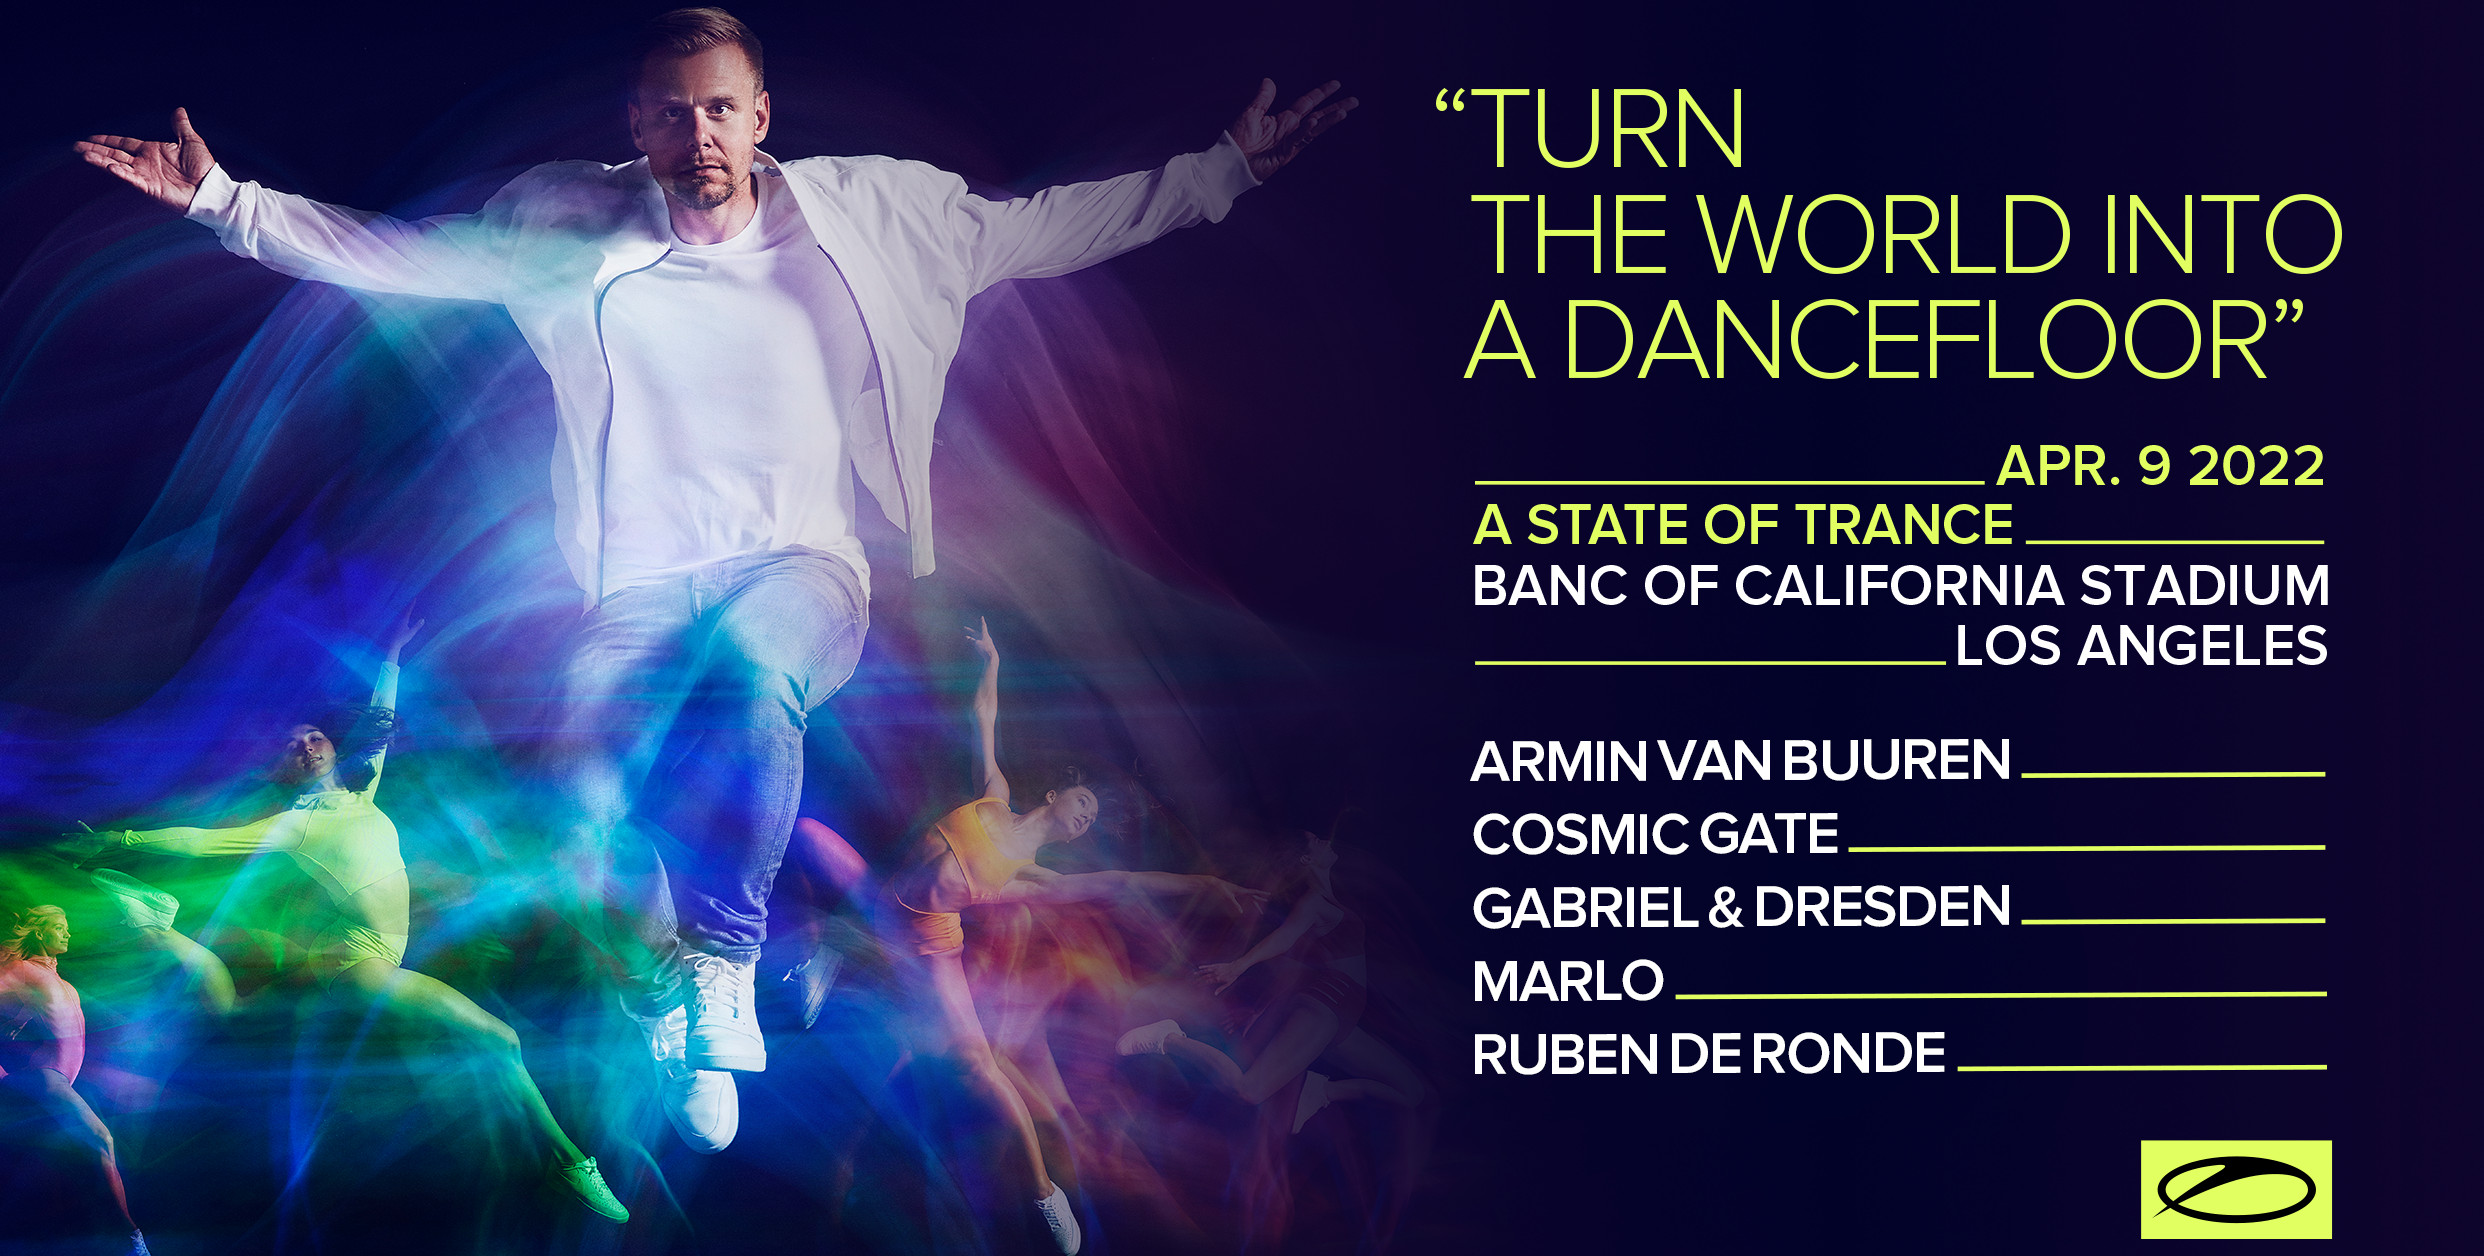 MaRLo - Live @ A State Of Trance Festival 1000, Banc of California Stadium Los Angeles - 09 April 2022